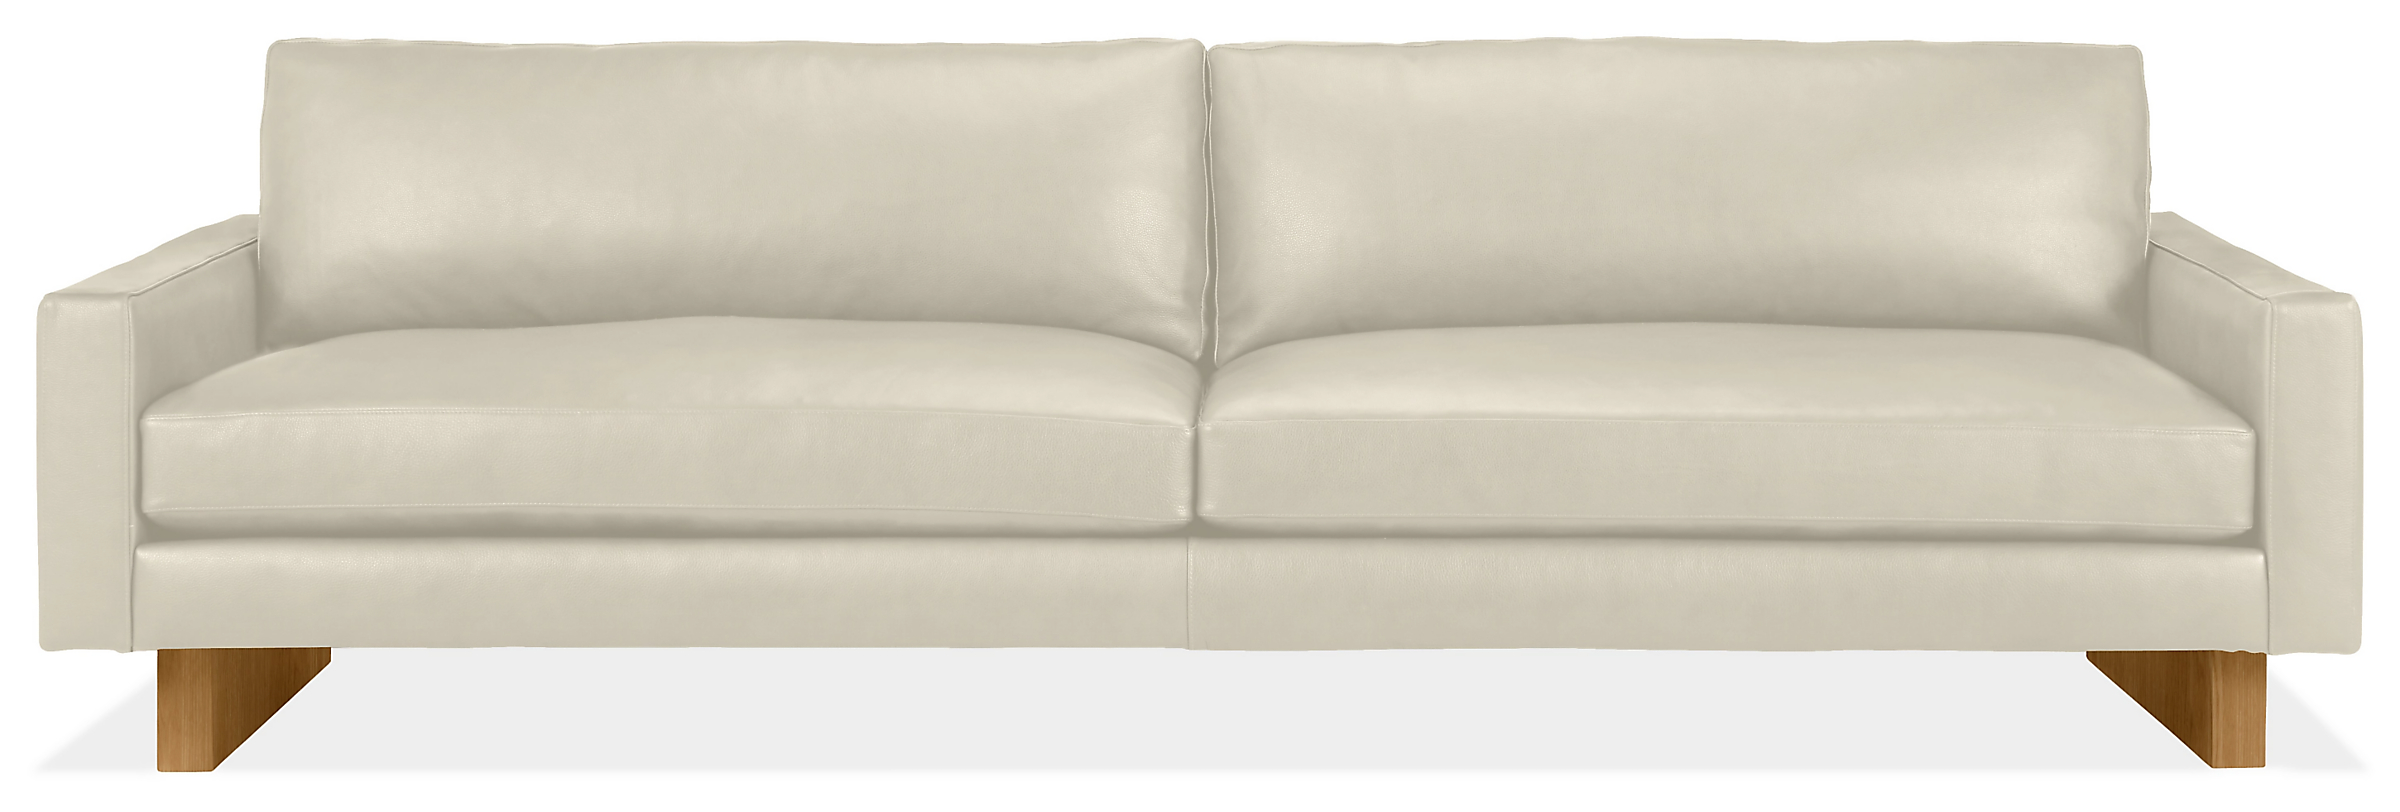 Pierson 102" Sofa in Vento Ivory Leather with White Oak